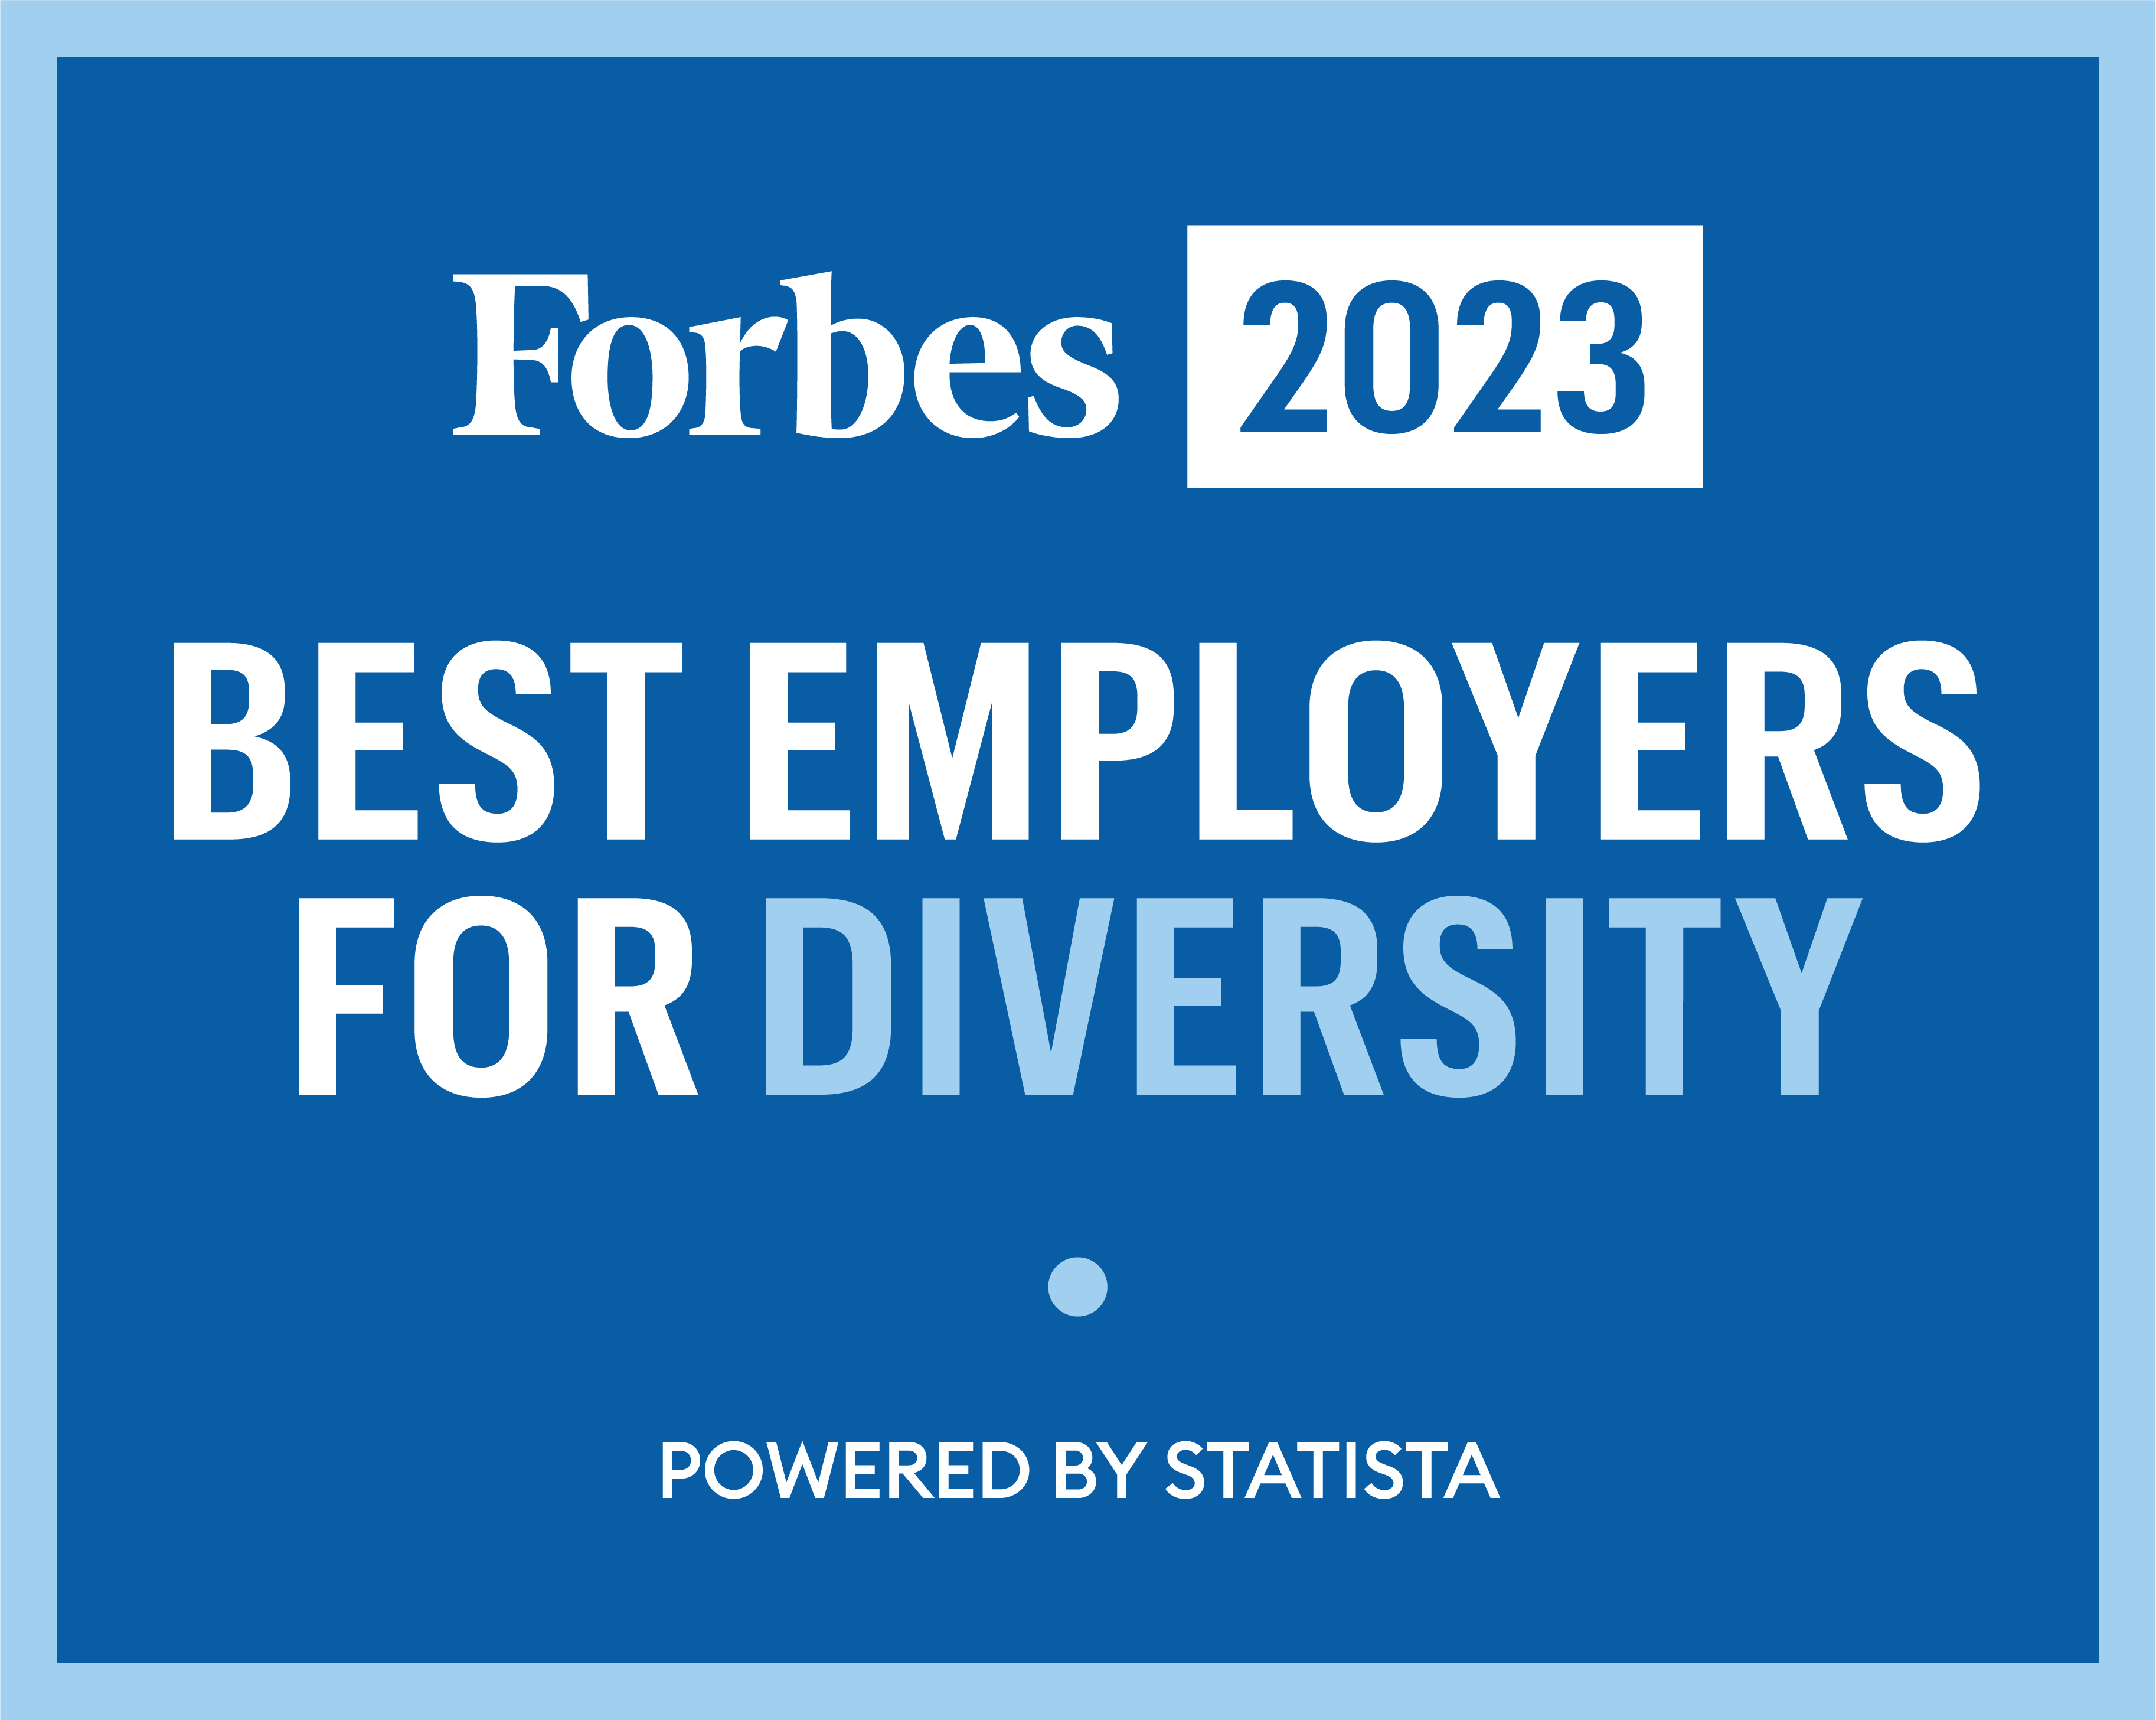 Forbes Best Employers for Diversity logo